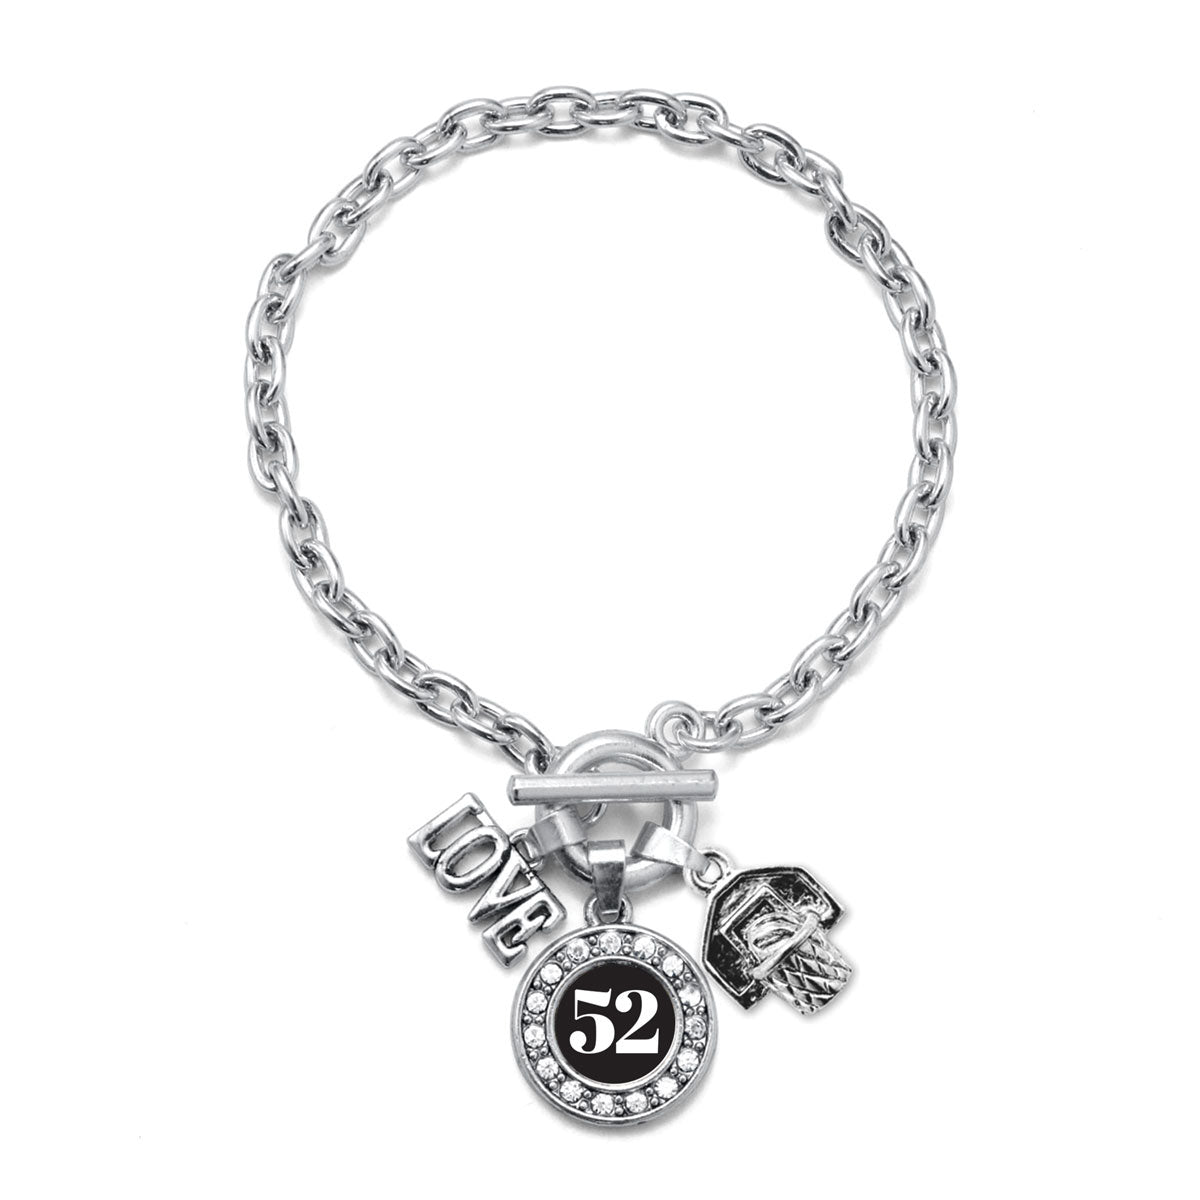 Silver Basketball Hoop - Sports Number 52 Circle Charm Toggle Bracelet